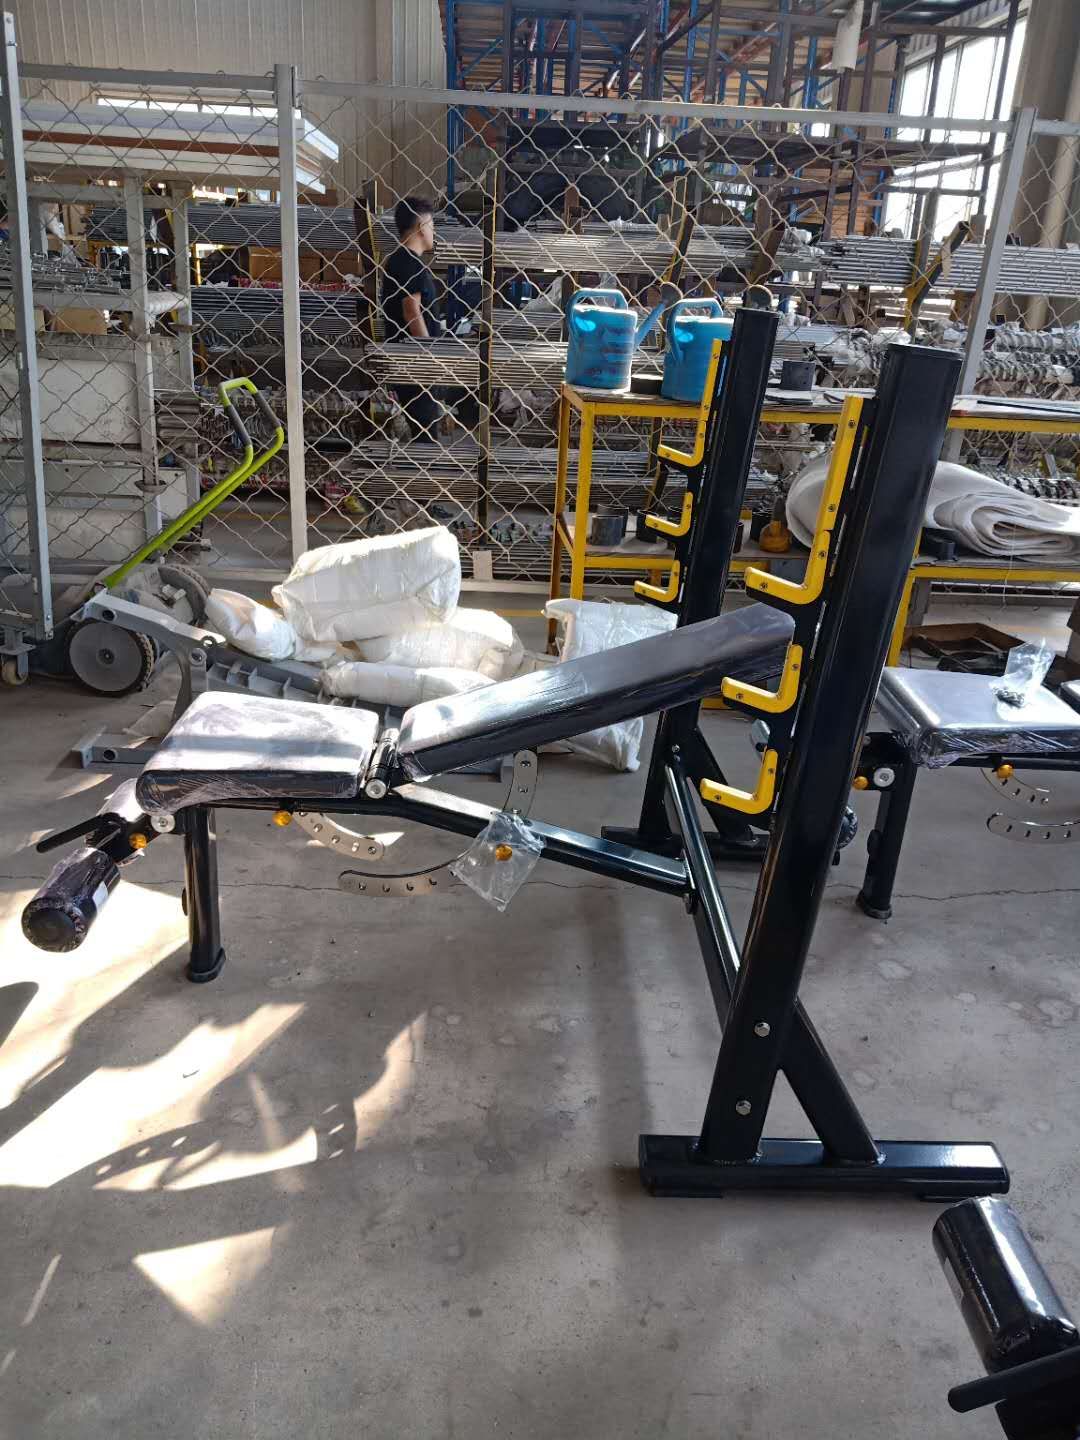 IC-2002 Adjustable Commercial Olympic FID Bench Press